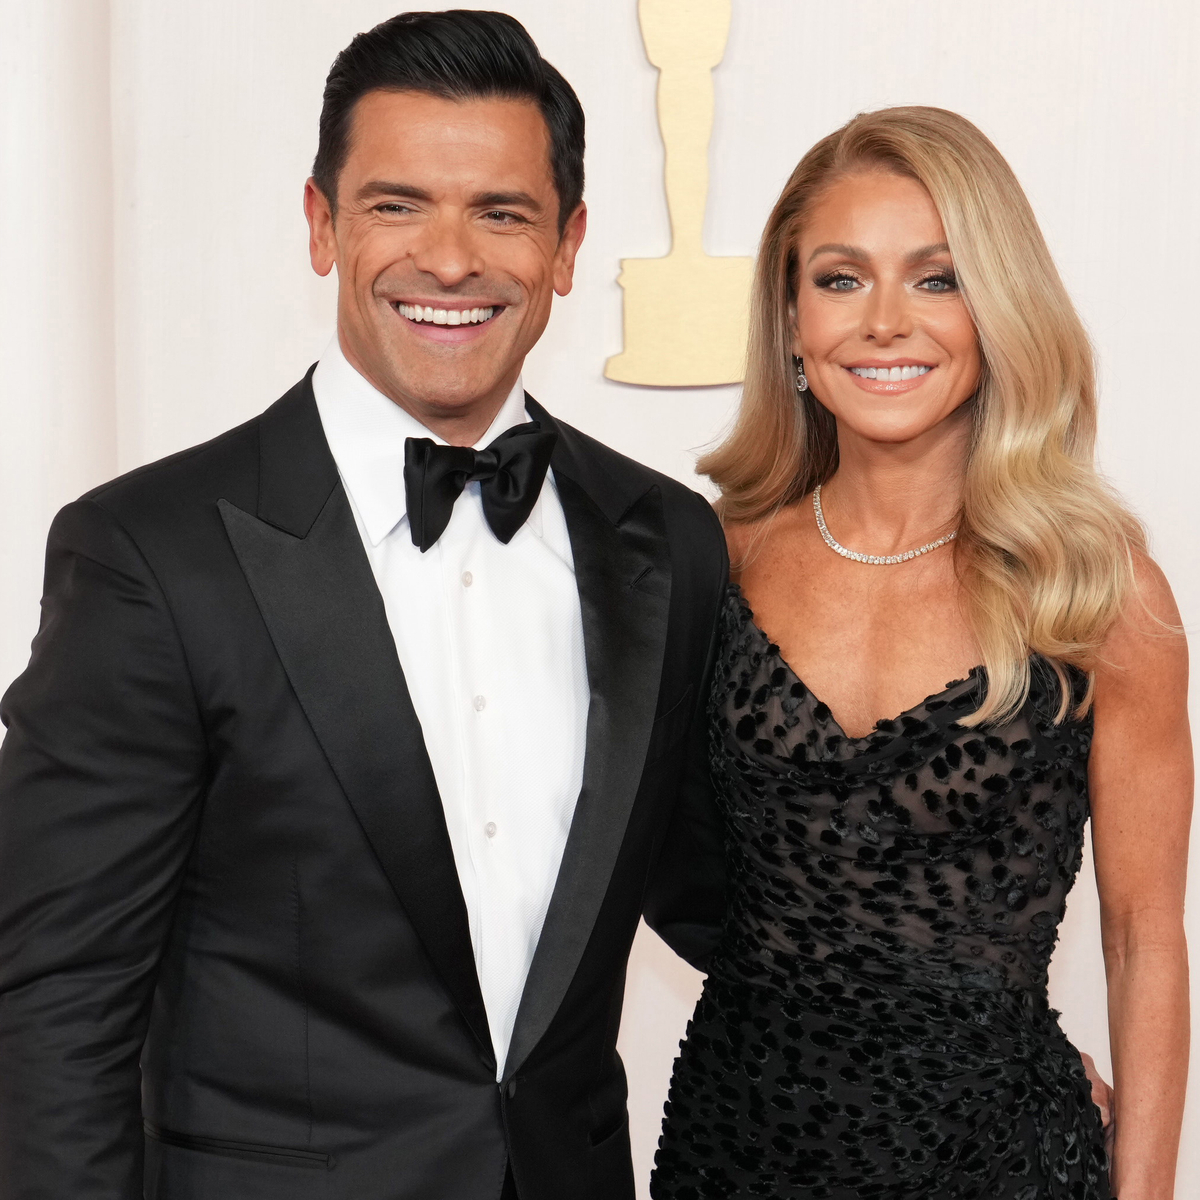 Kelly Ripa Says Mark Consuelos Kept Her Up All Night—But It's Not What You Think